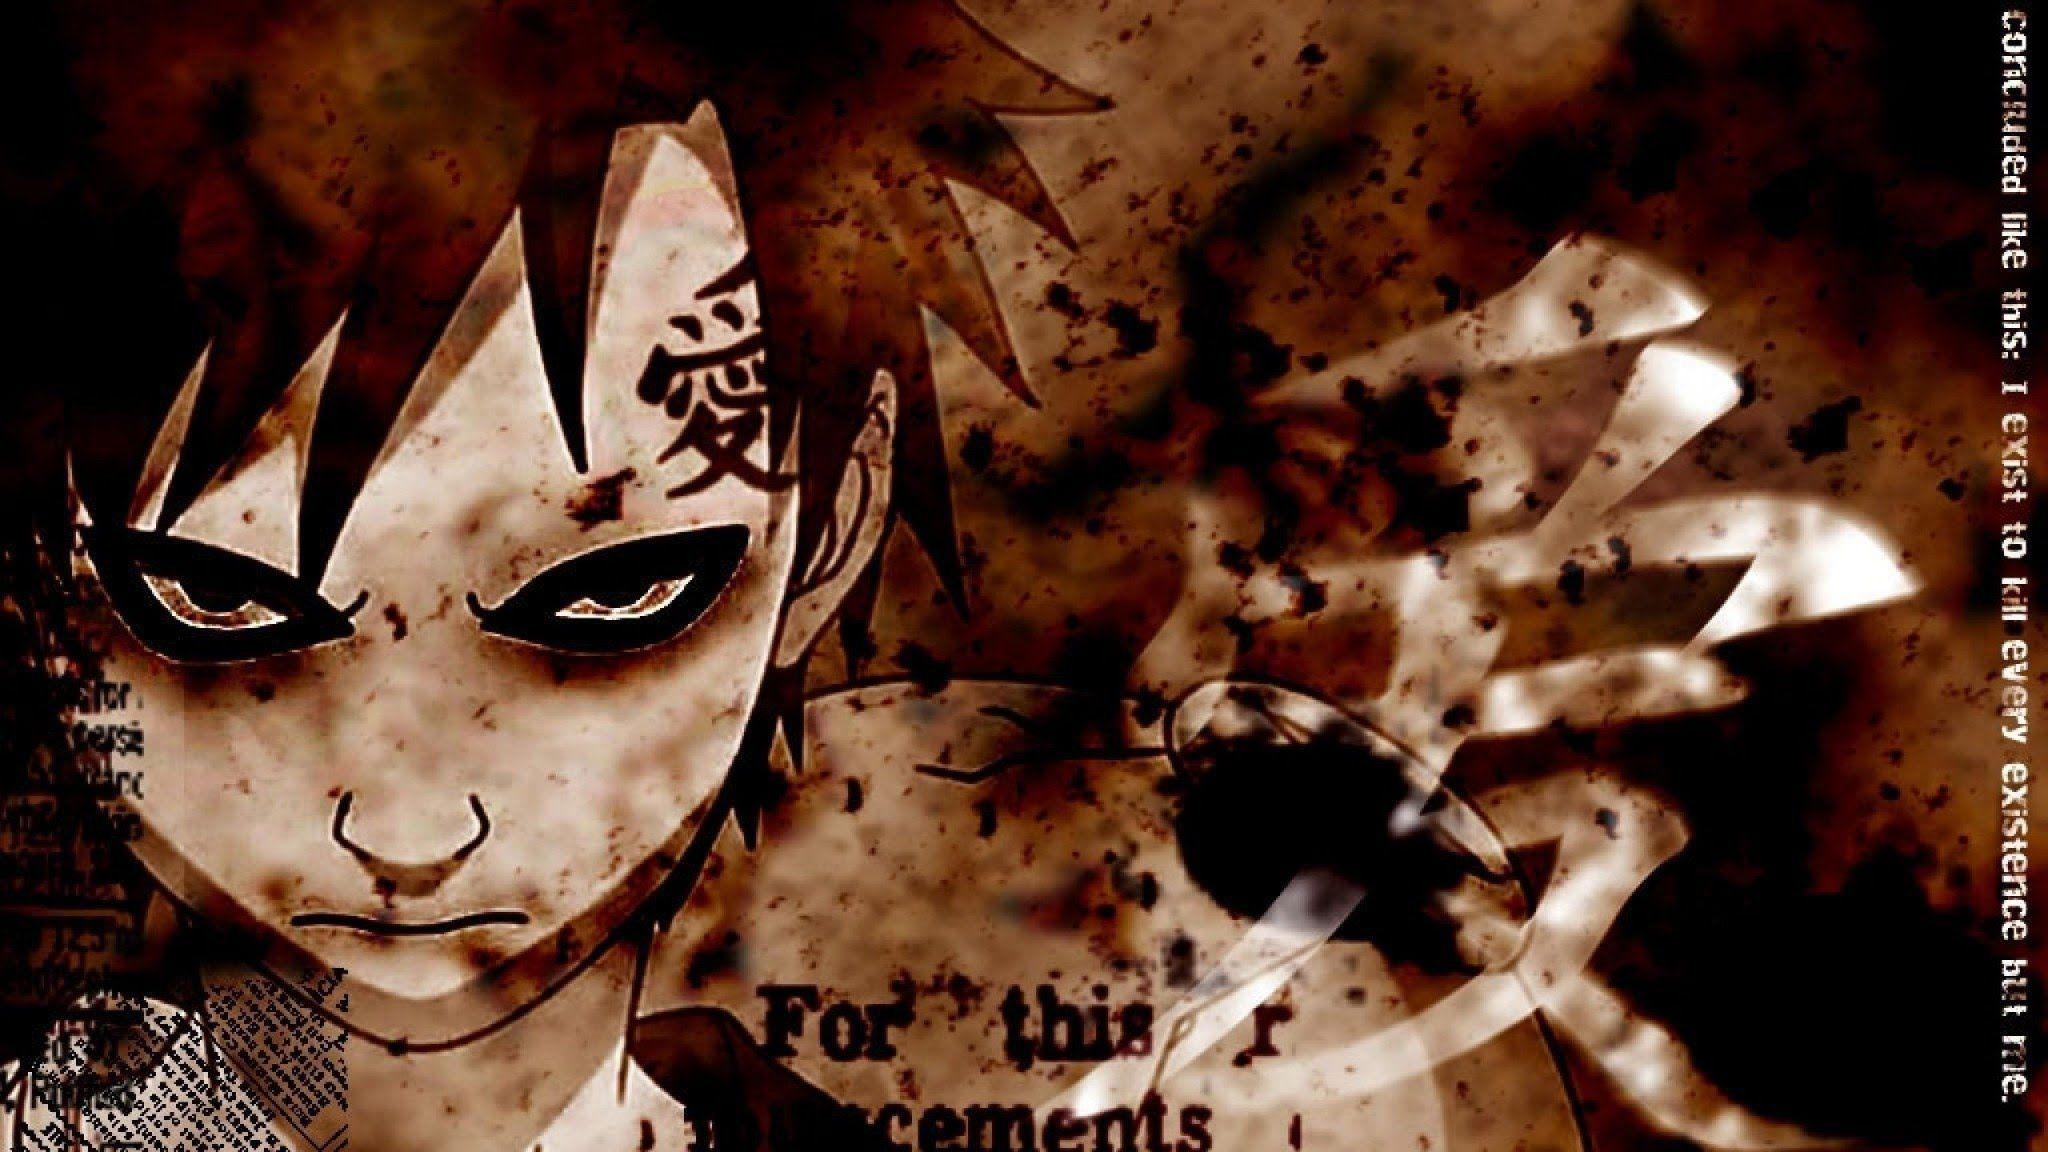 garra pain and loneliness amv